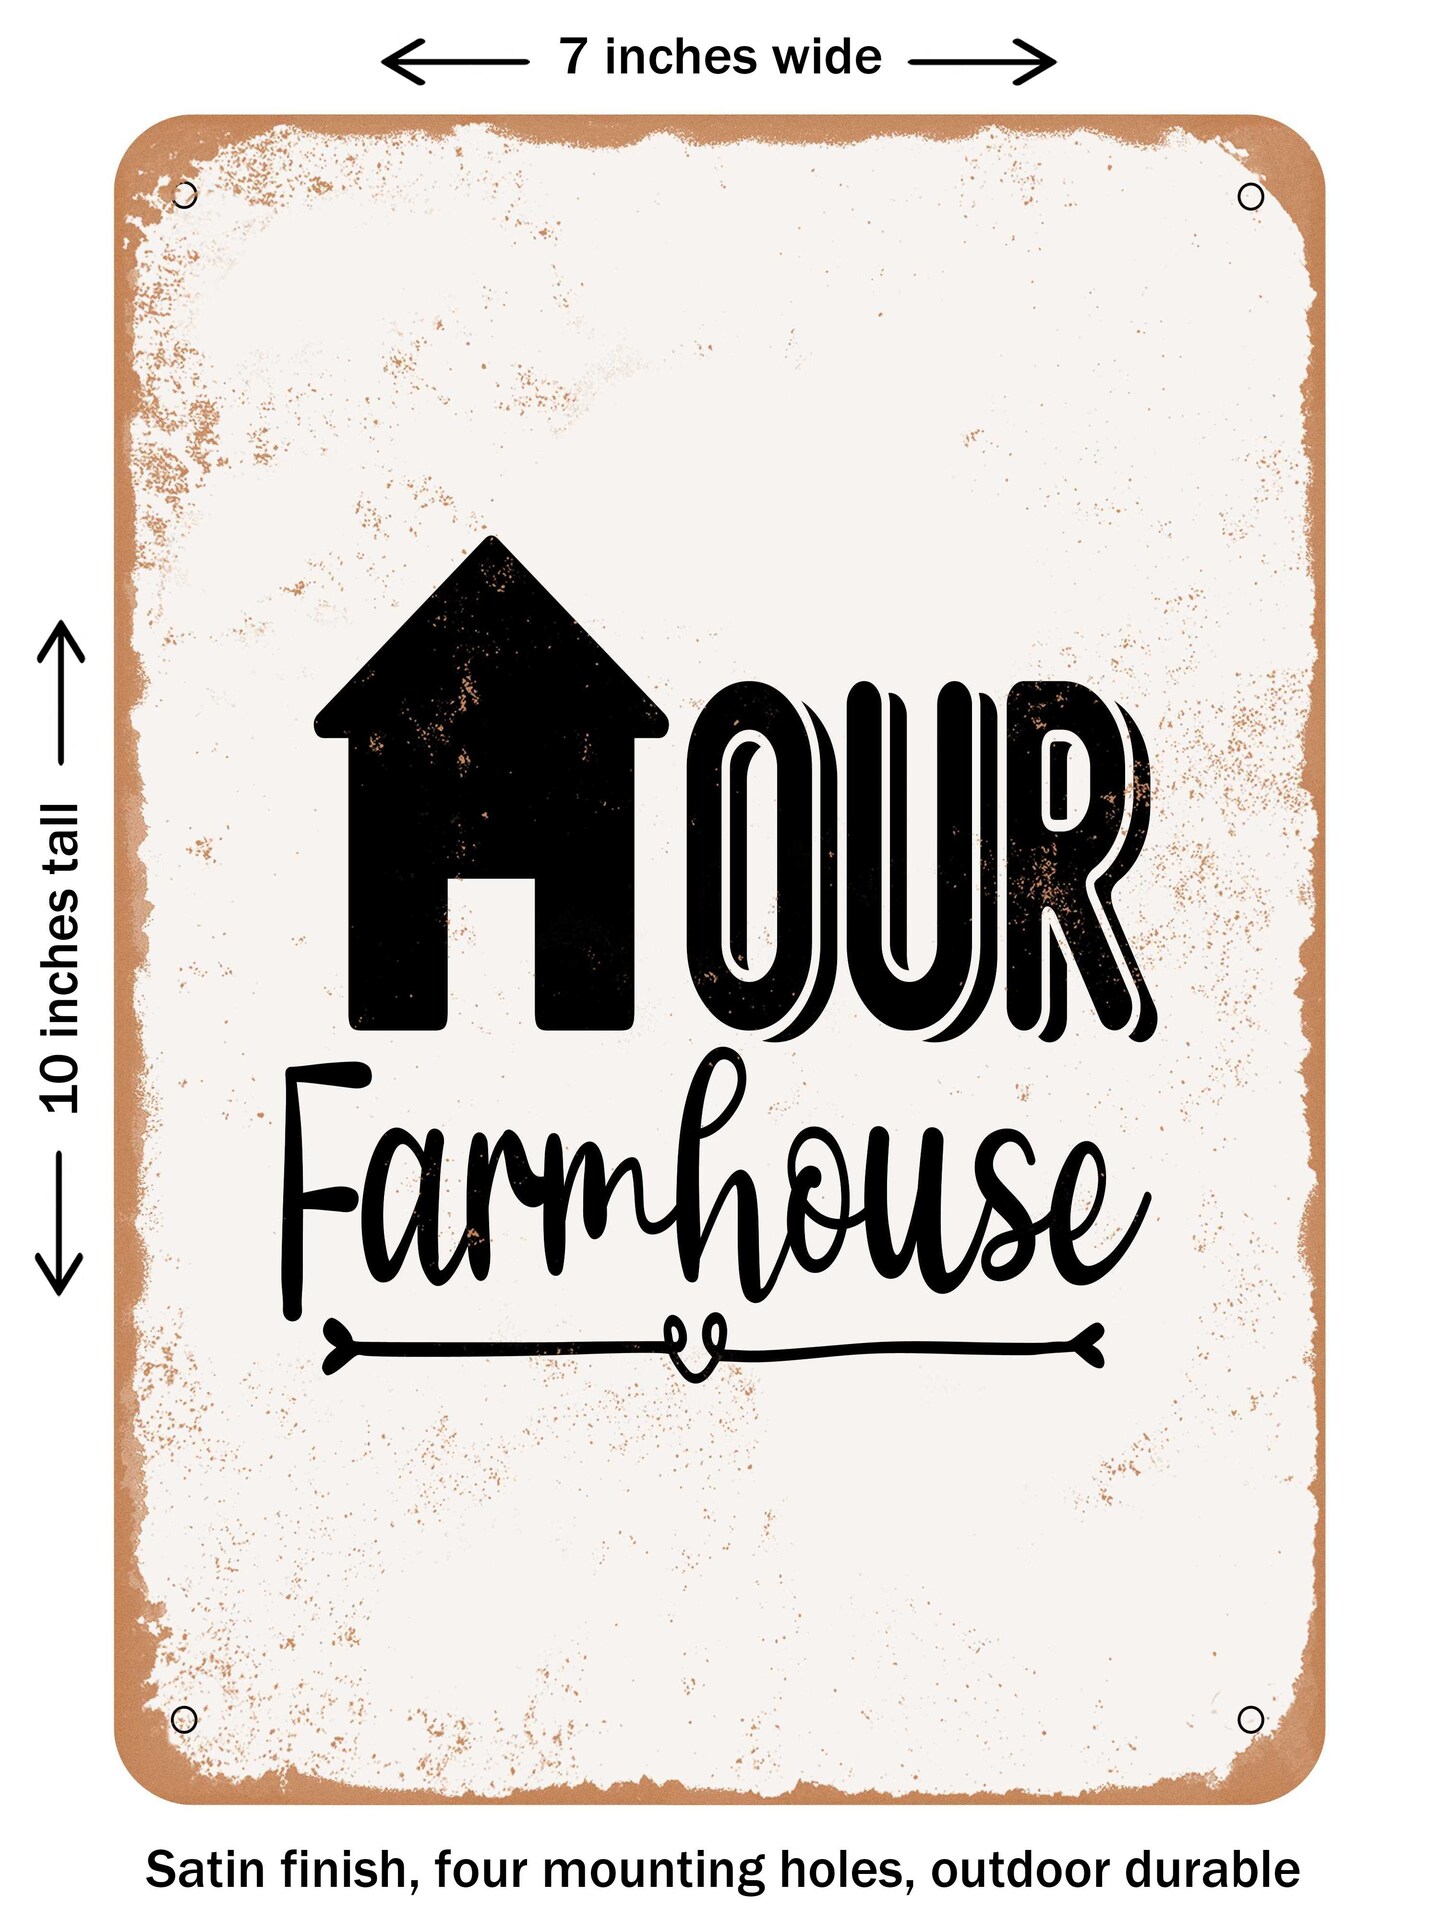 DECORATIVE METAL SIGN - Our Farmhouse - 2 - Vintage Rusty Look